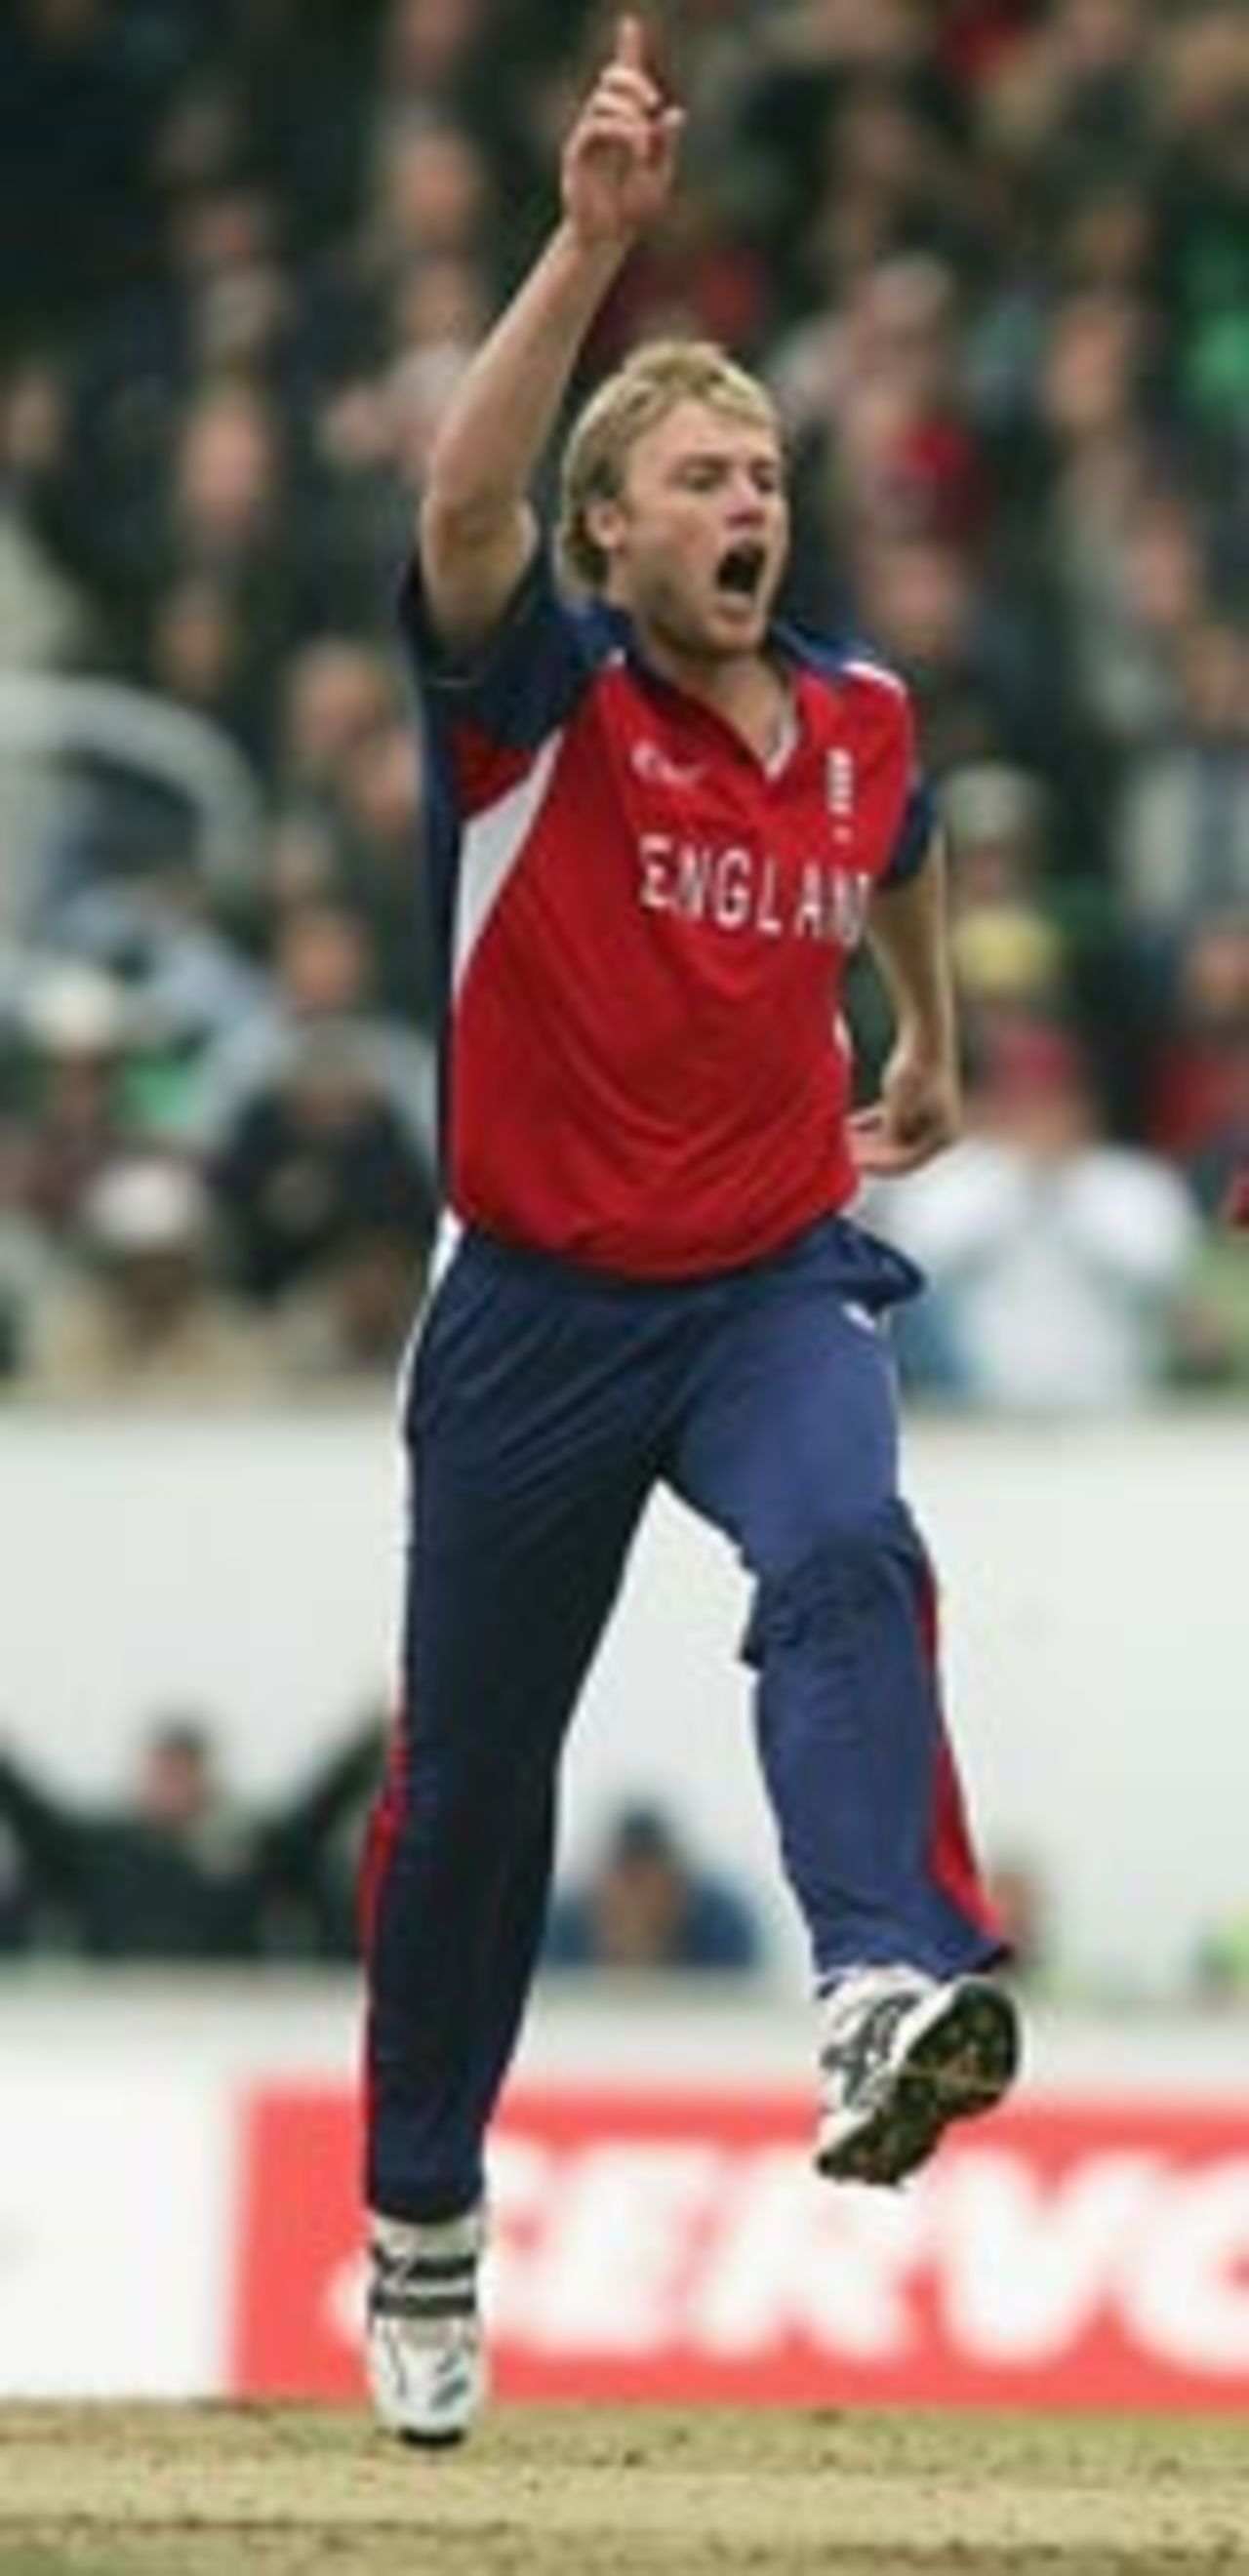 Andrew Flintoff celebrates a West Indian wicket, England v West Indies, ICC Champions Trophy final, September 25 2004